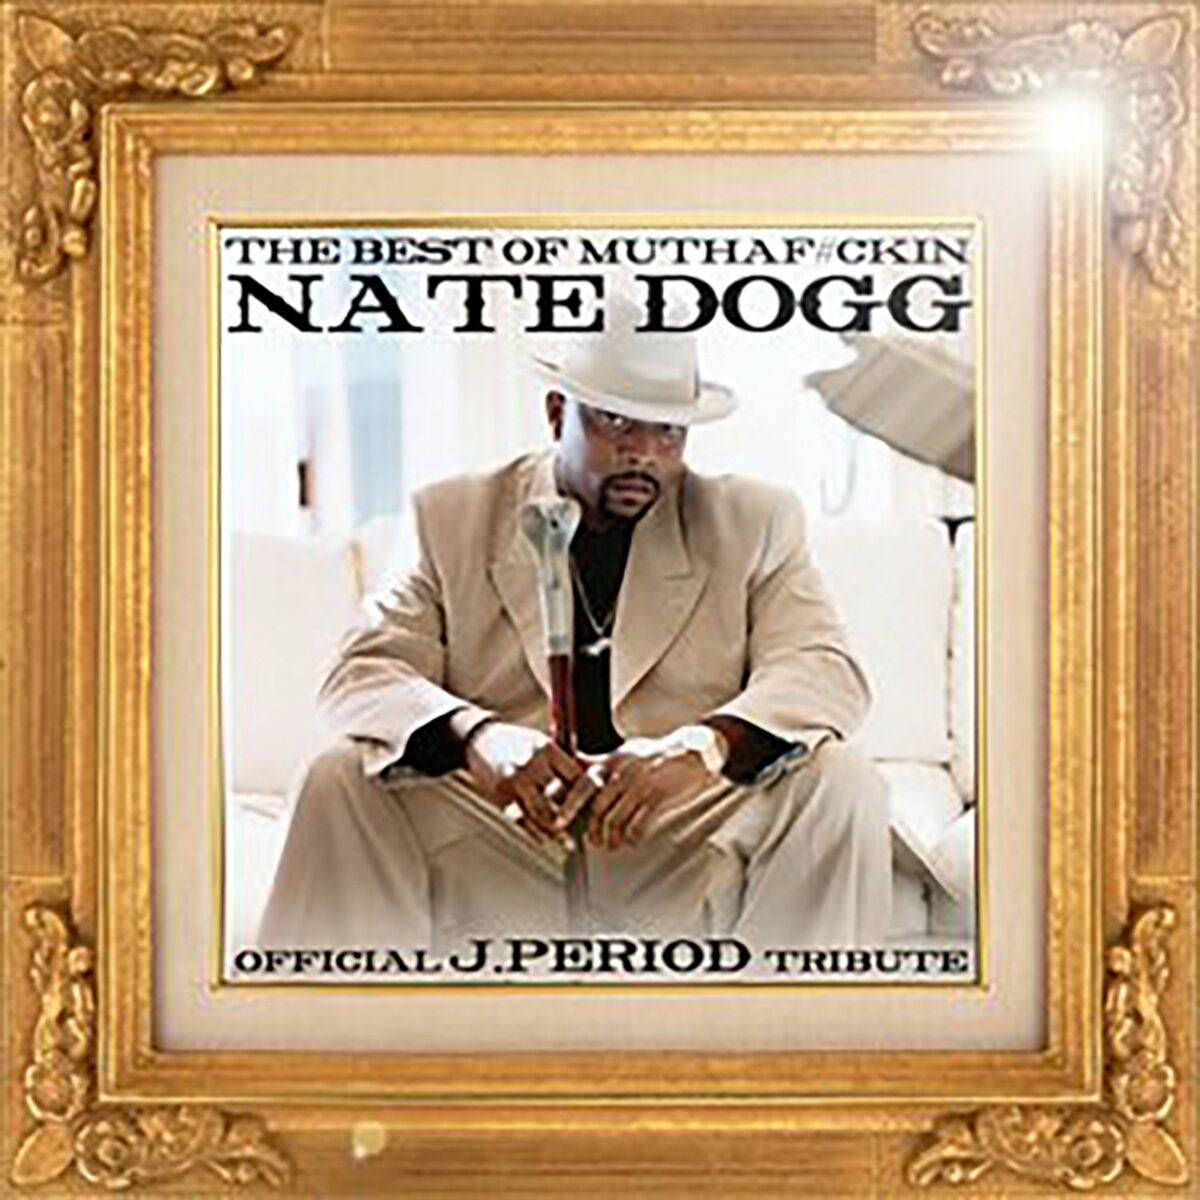 Nate Dogg: albums, songs, playlists | Listen on Deezer